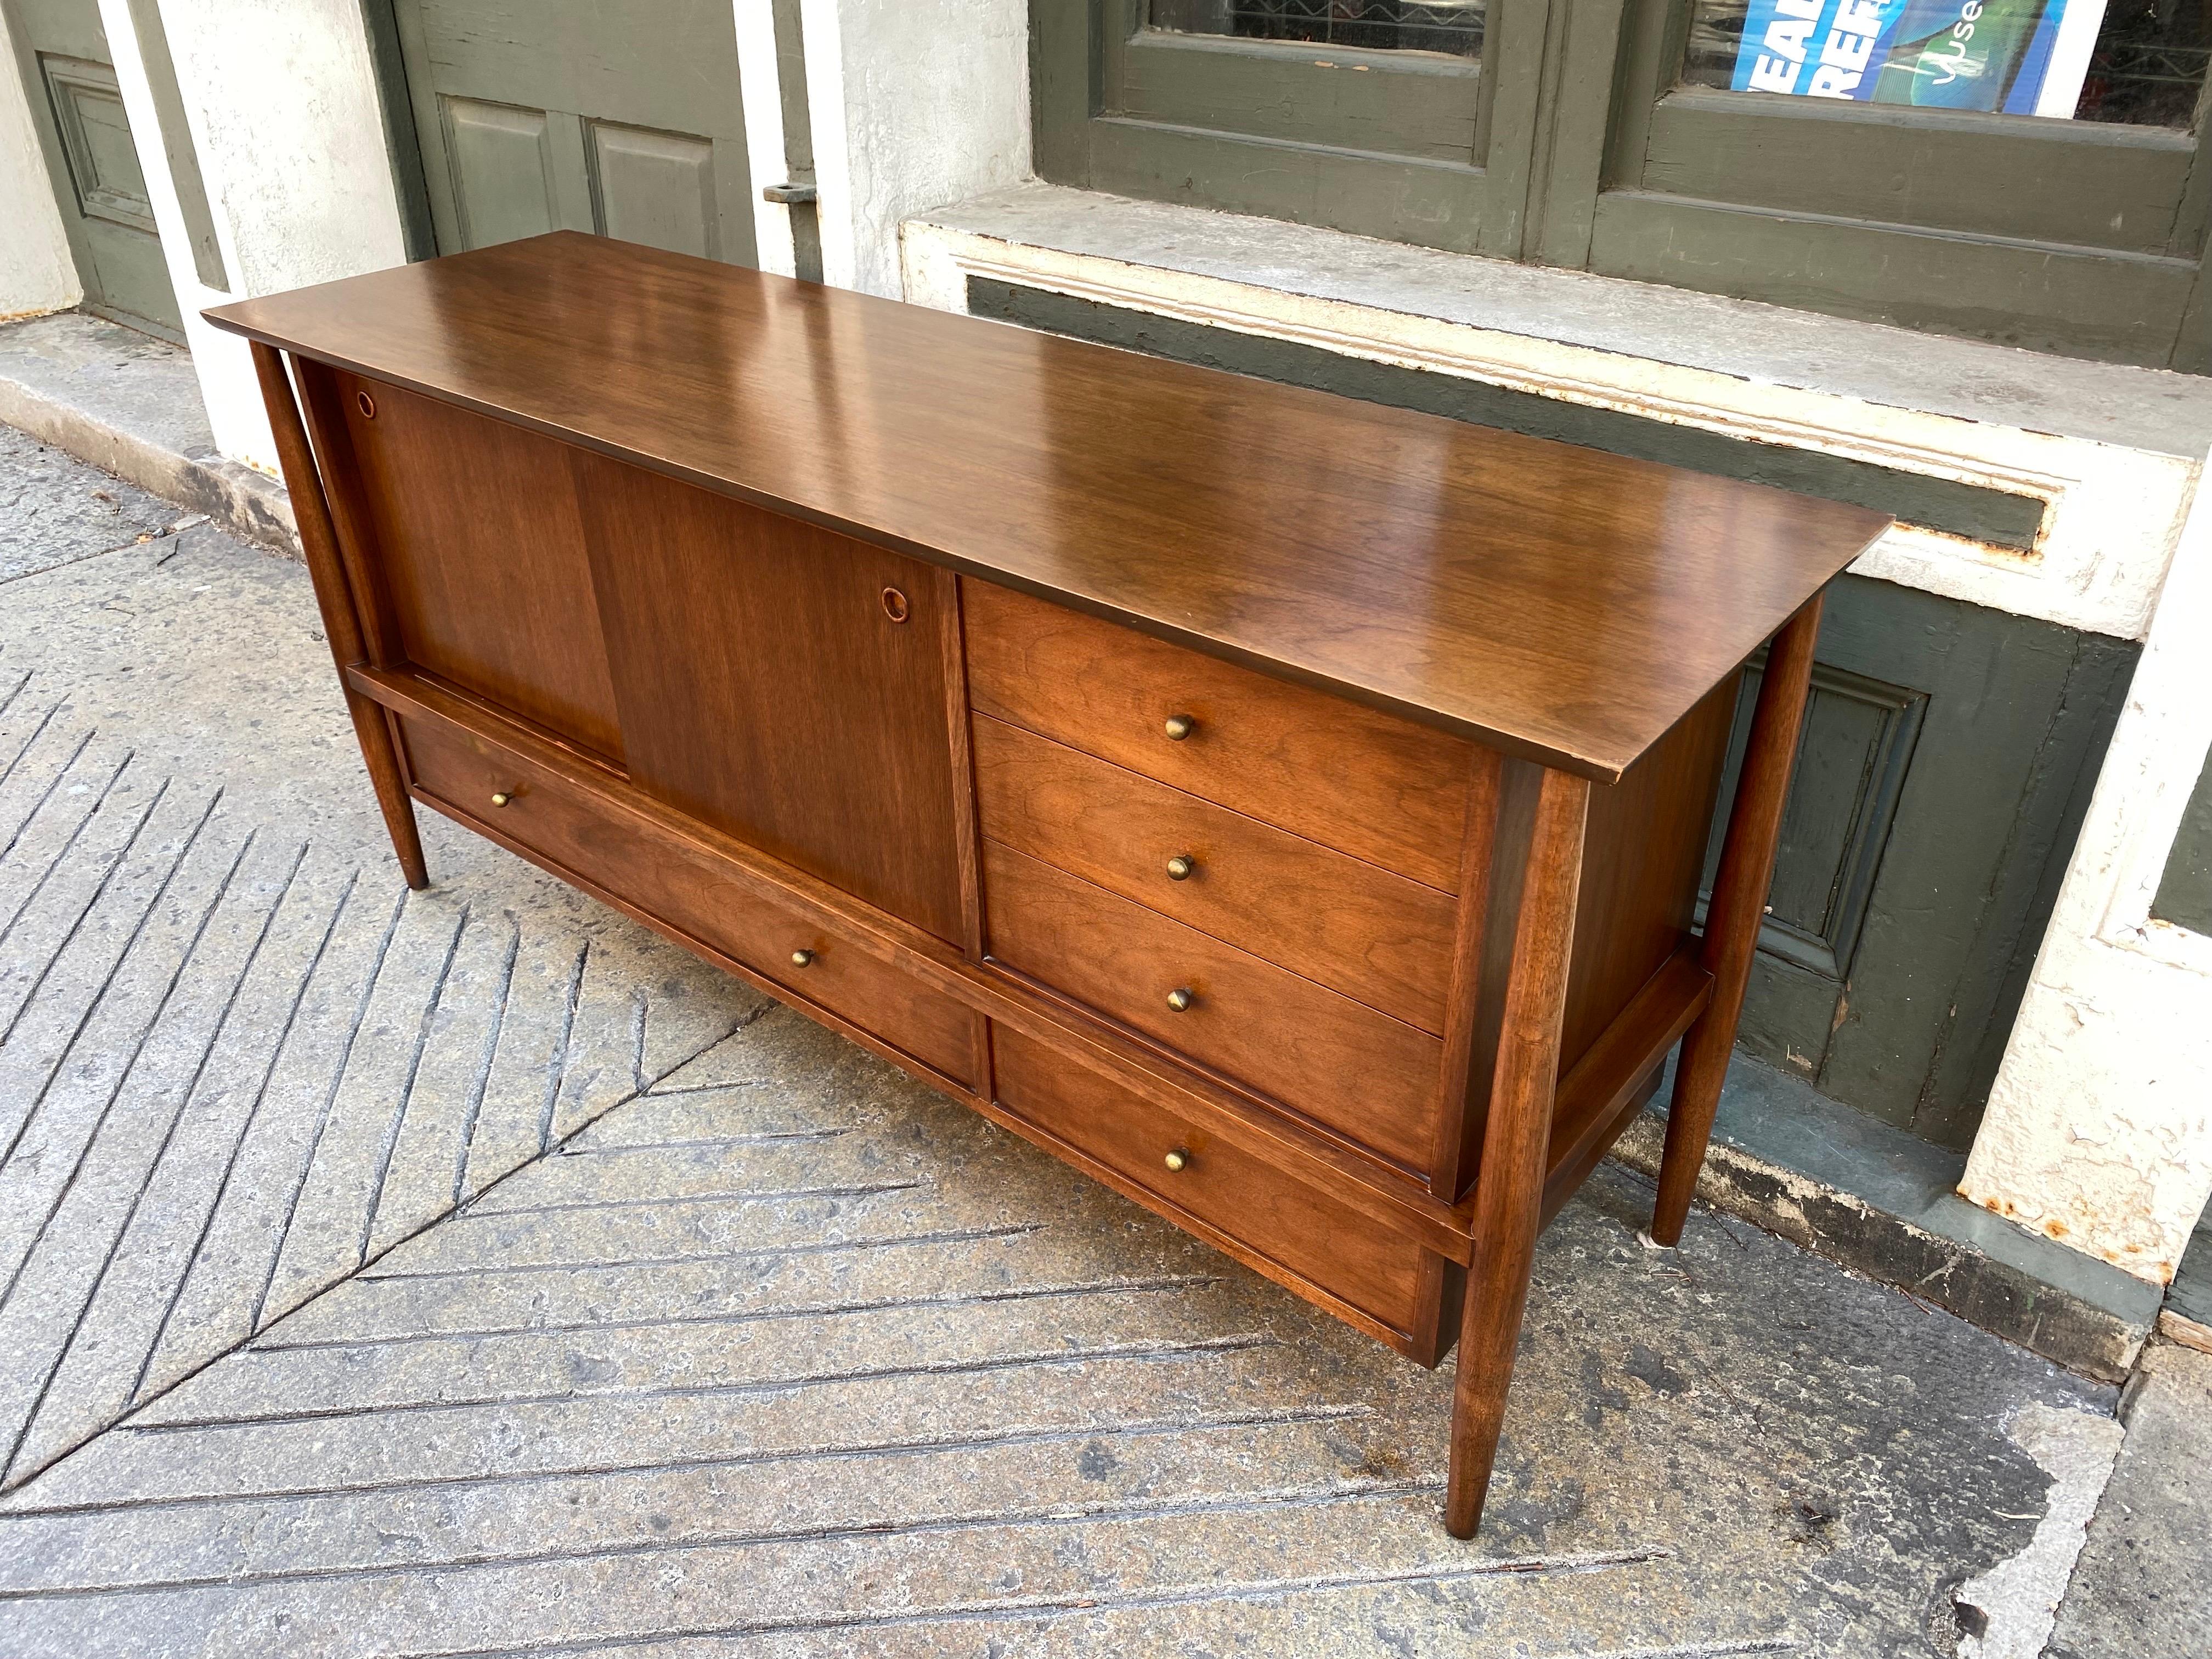 Walnut Buffet or Credenza sold through John Stuart. Made by the company Mt. Airy. Nice design with a Finn Juhl Influence with floating body and attached legs. In Original condition with one minor touch up to back left corner as seen in photo.